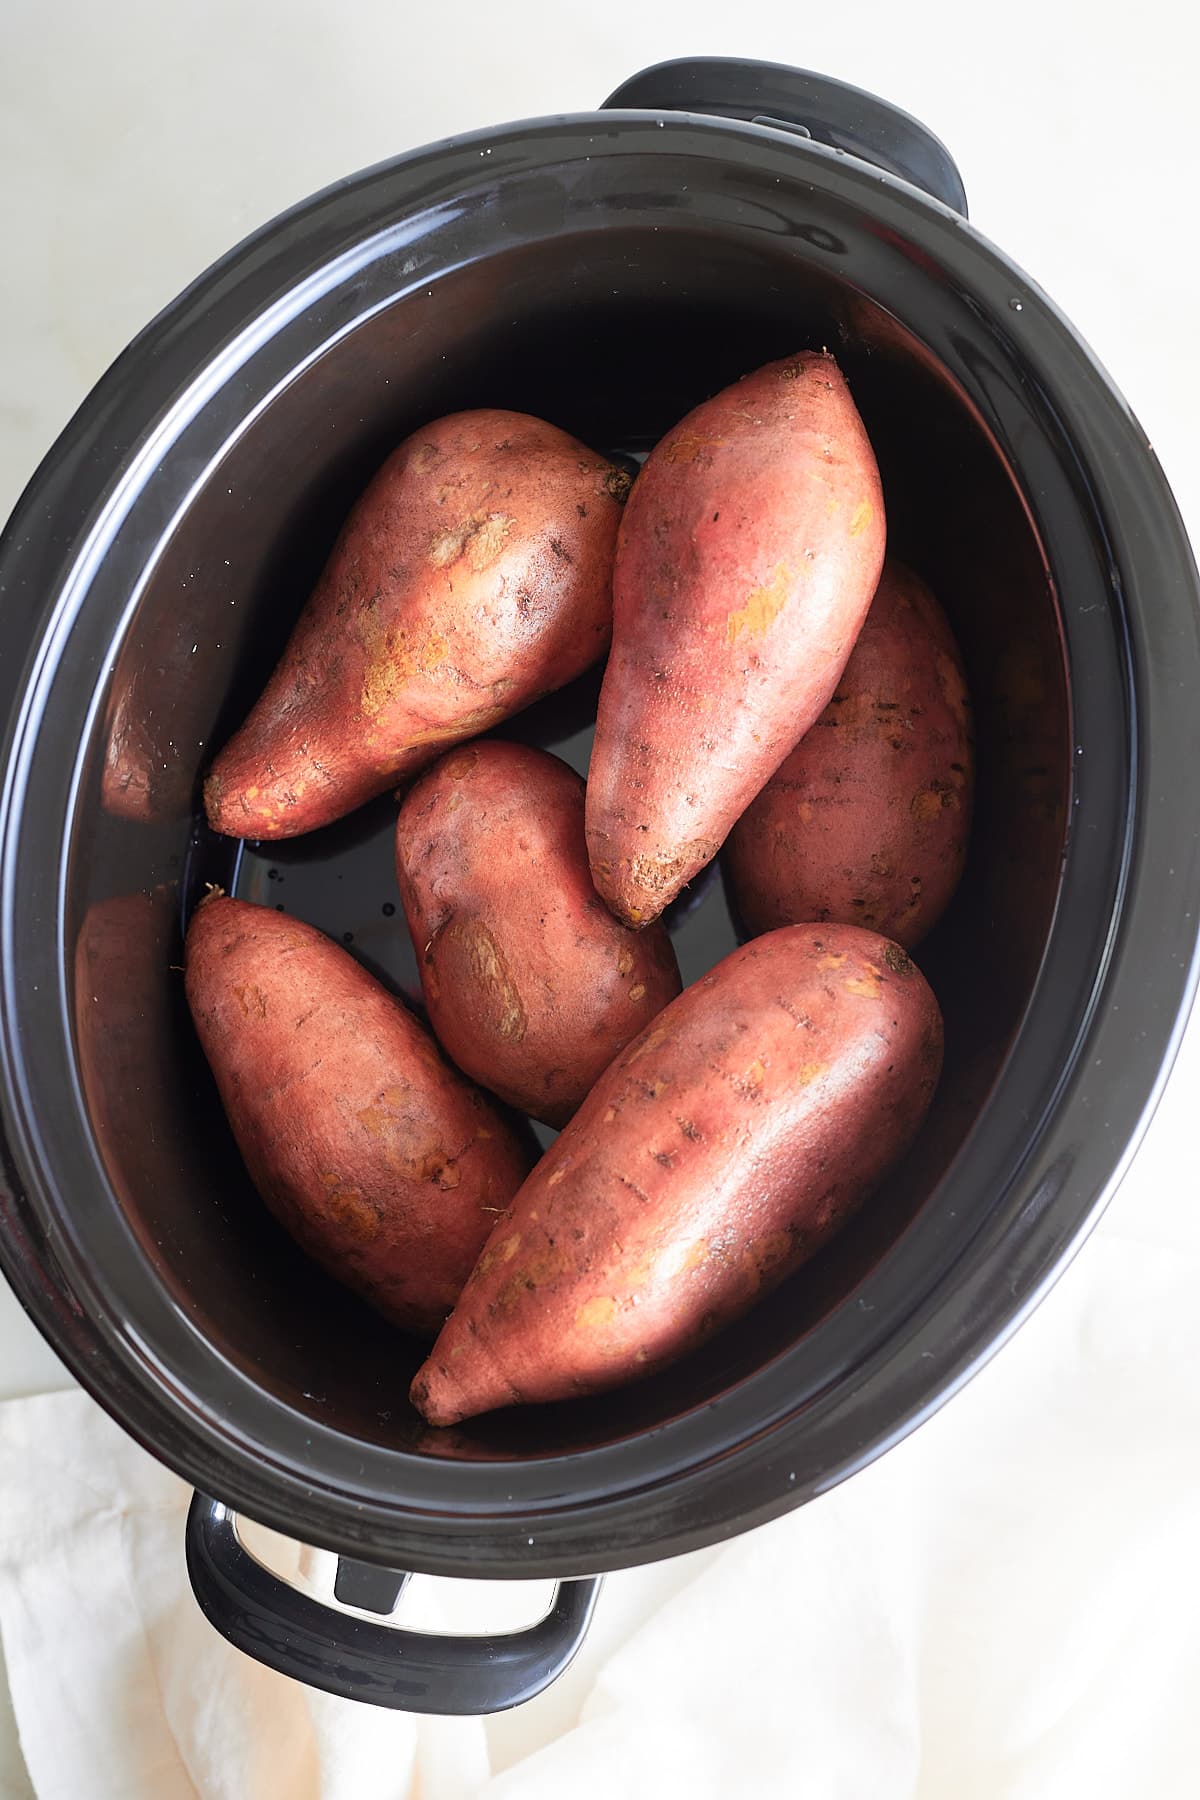 six whole sweet potatoes in a slow cooker